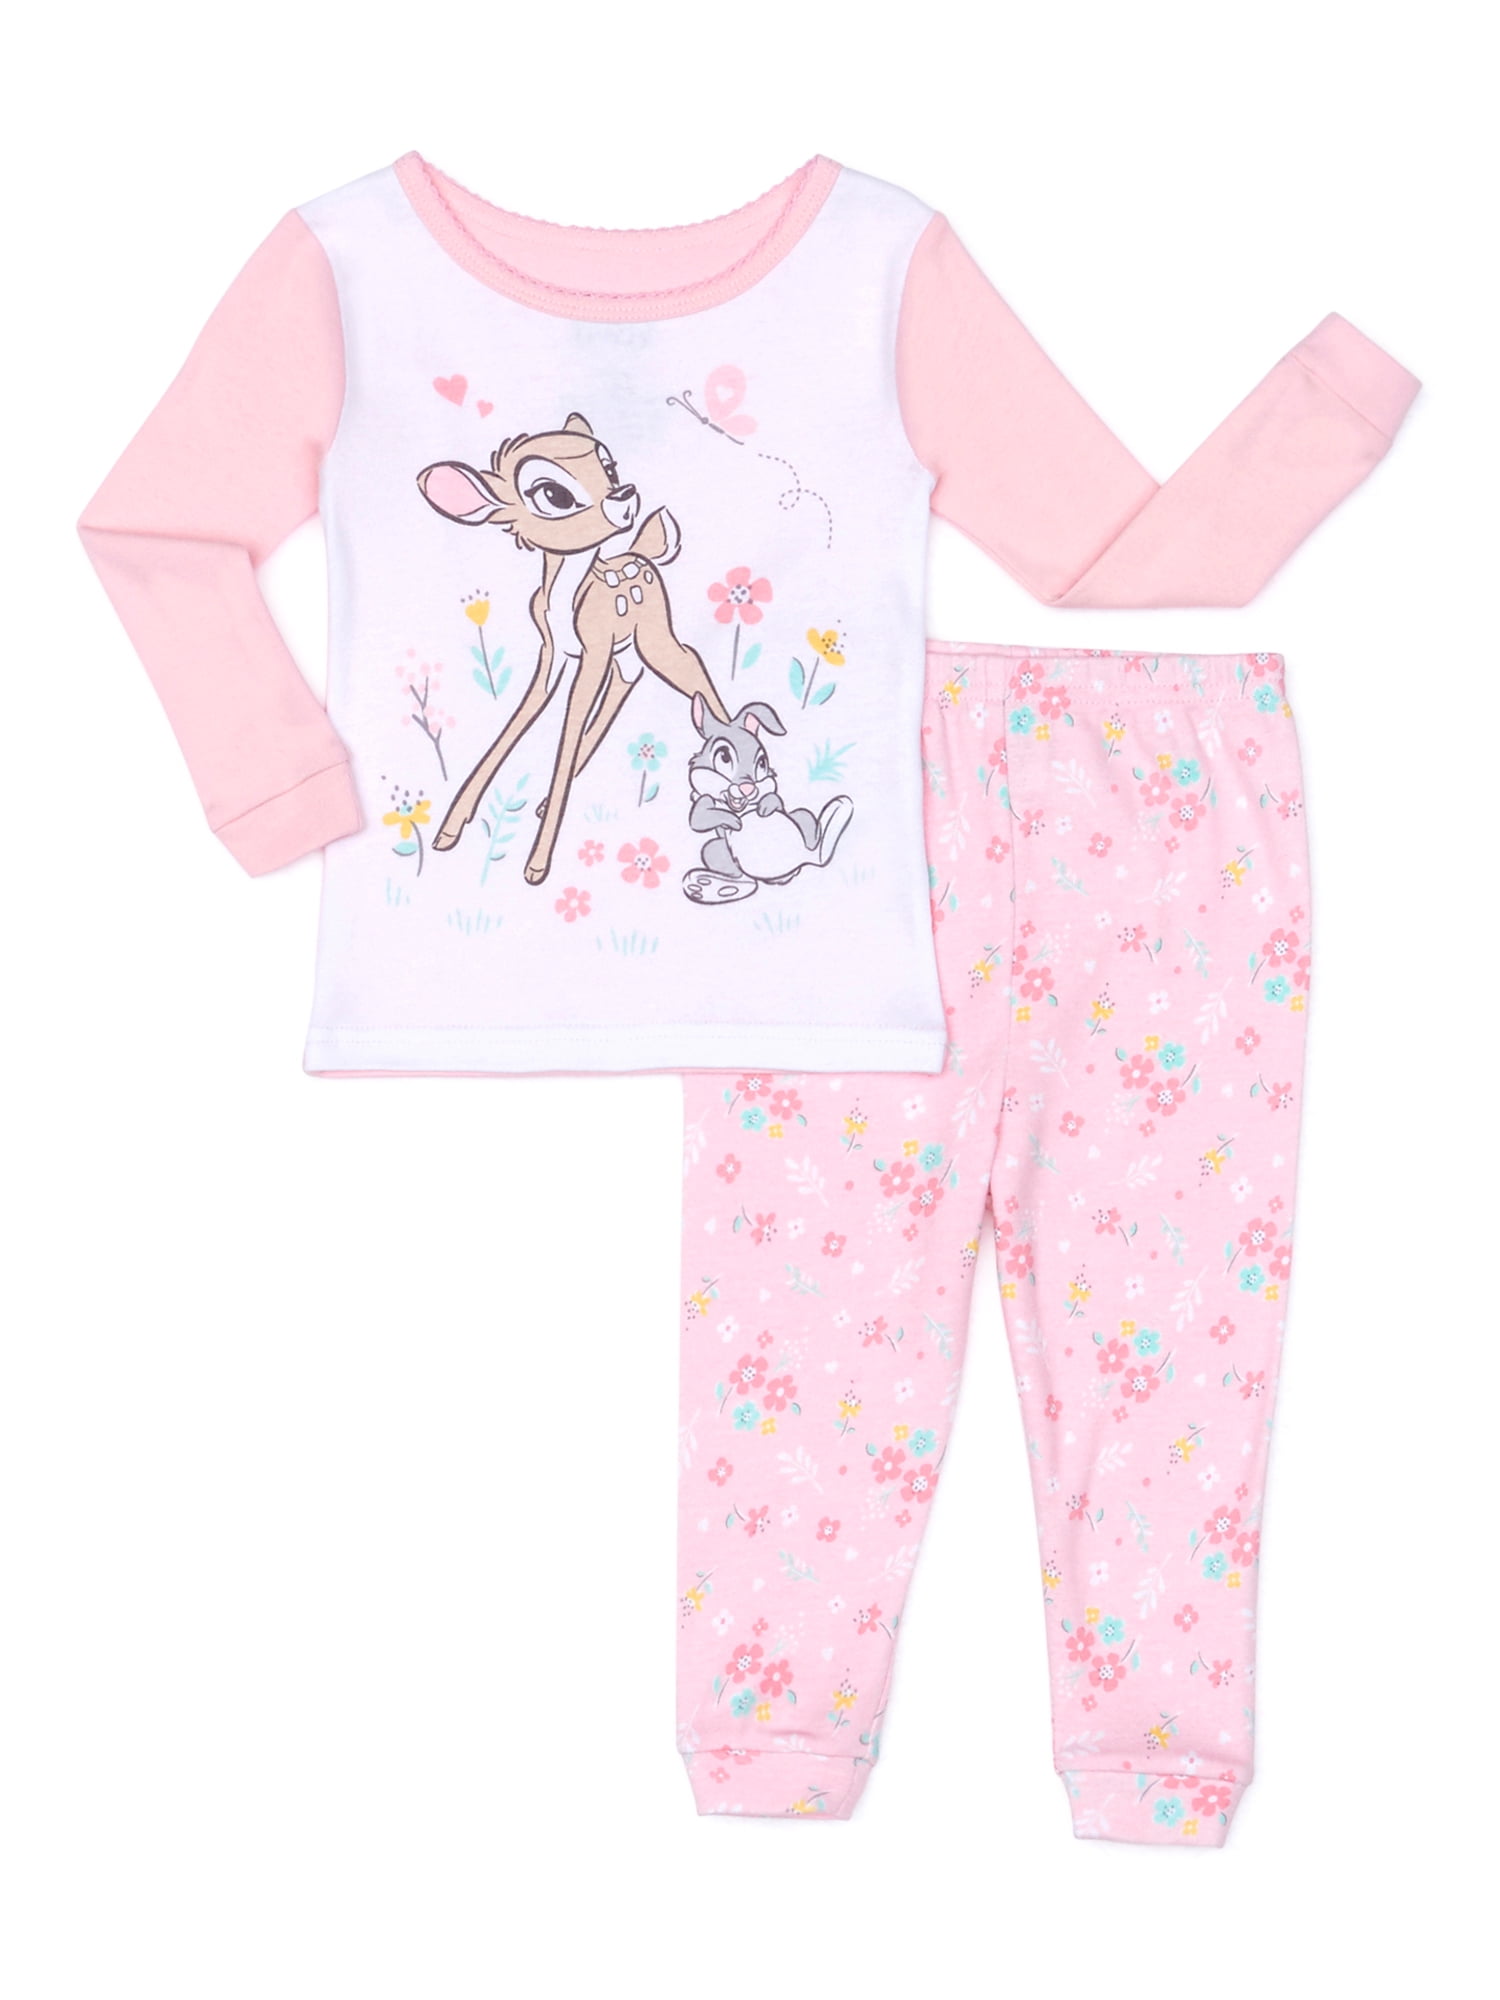 Details about   NWT BABY GAP GIRL DISNEY BABY SLEEPING BEAUTY GRAPHIC 2 PIECE SLEEP SET SIZE 2T 